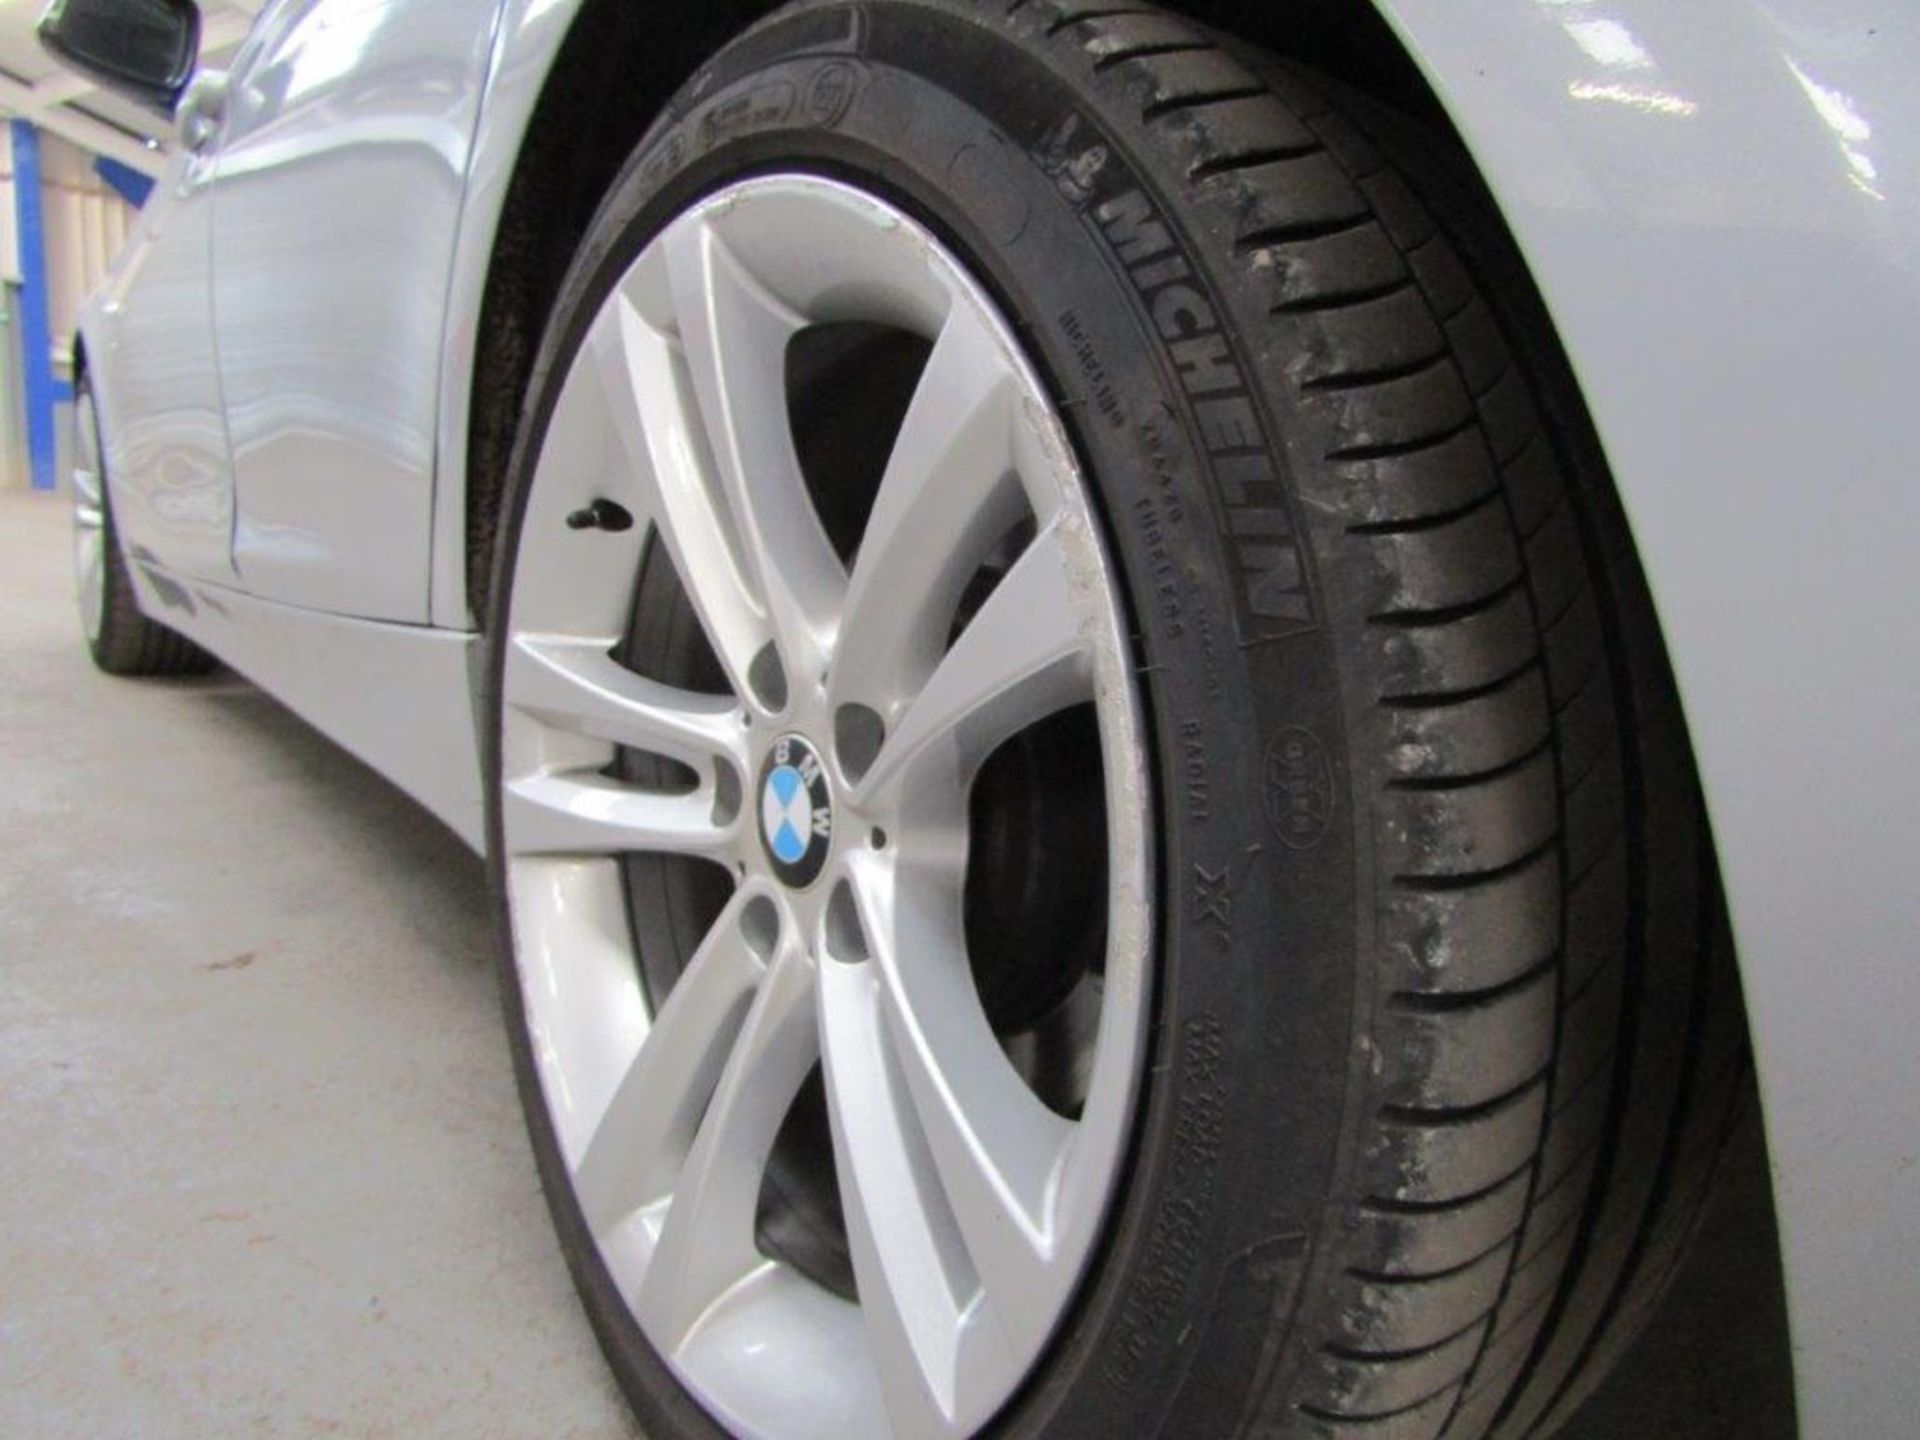 62 12 BMW 320D Sport Touring - Image 16 of 29